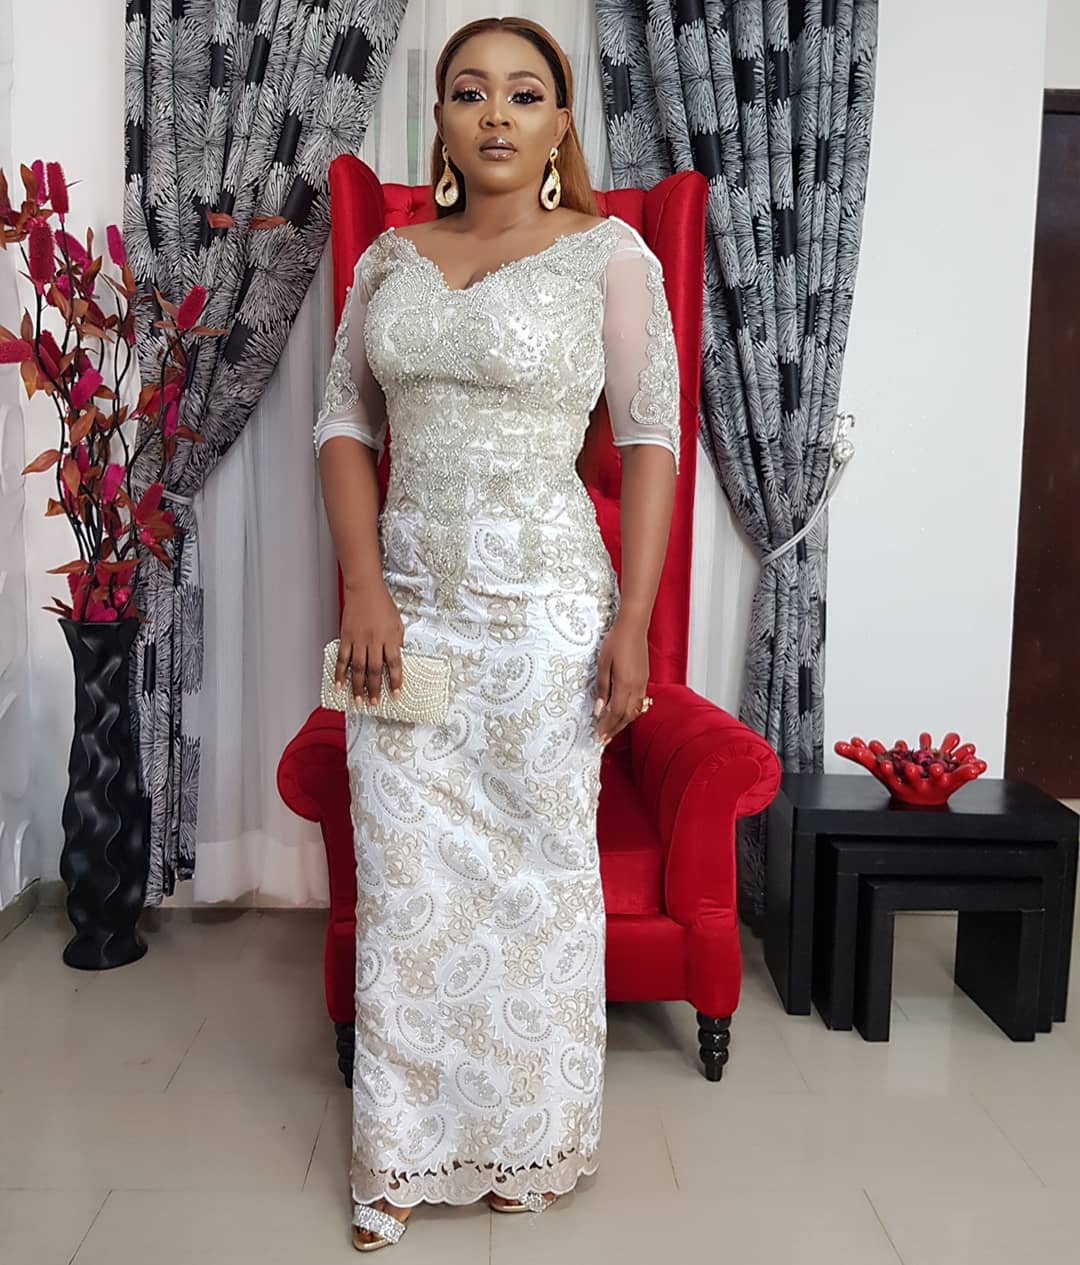 Photo of Mercy Aigbe in Lace Gown